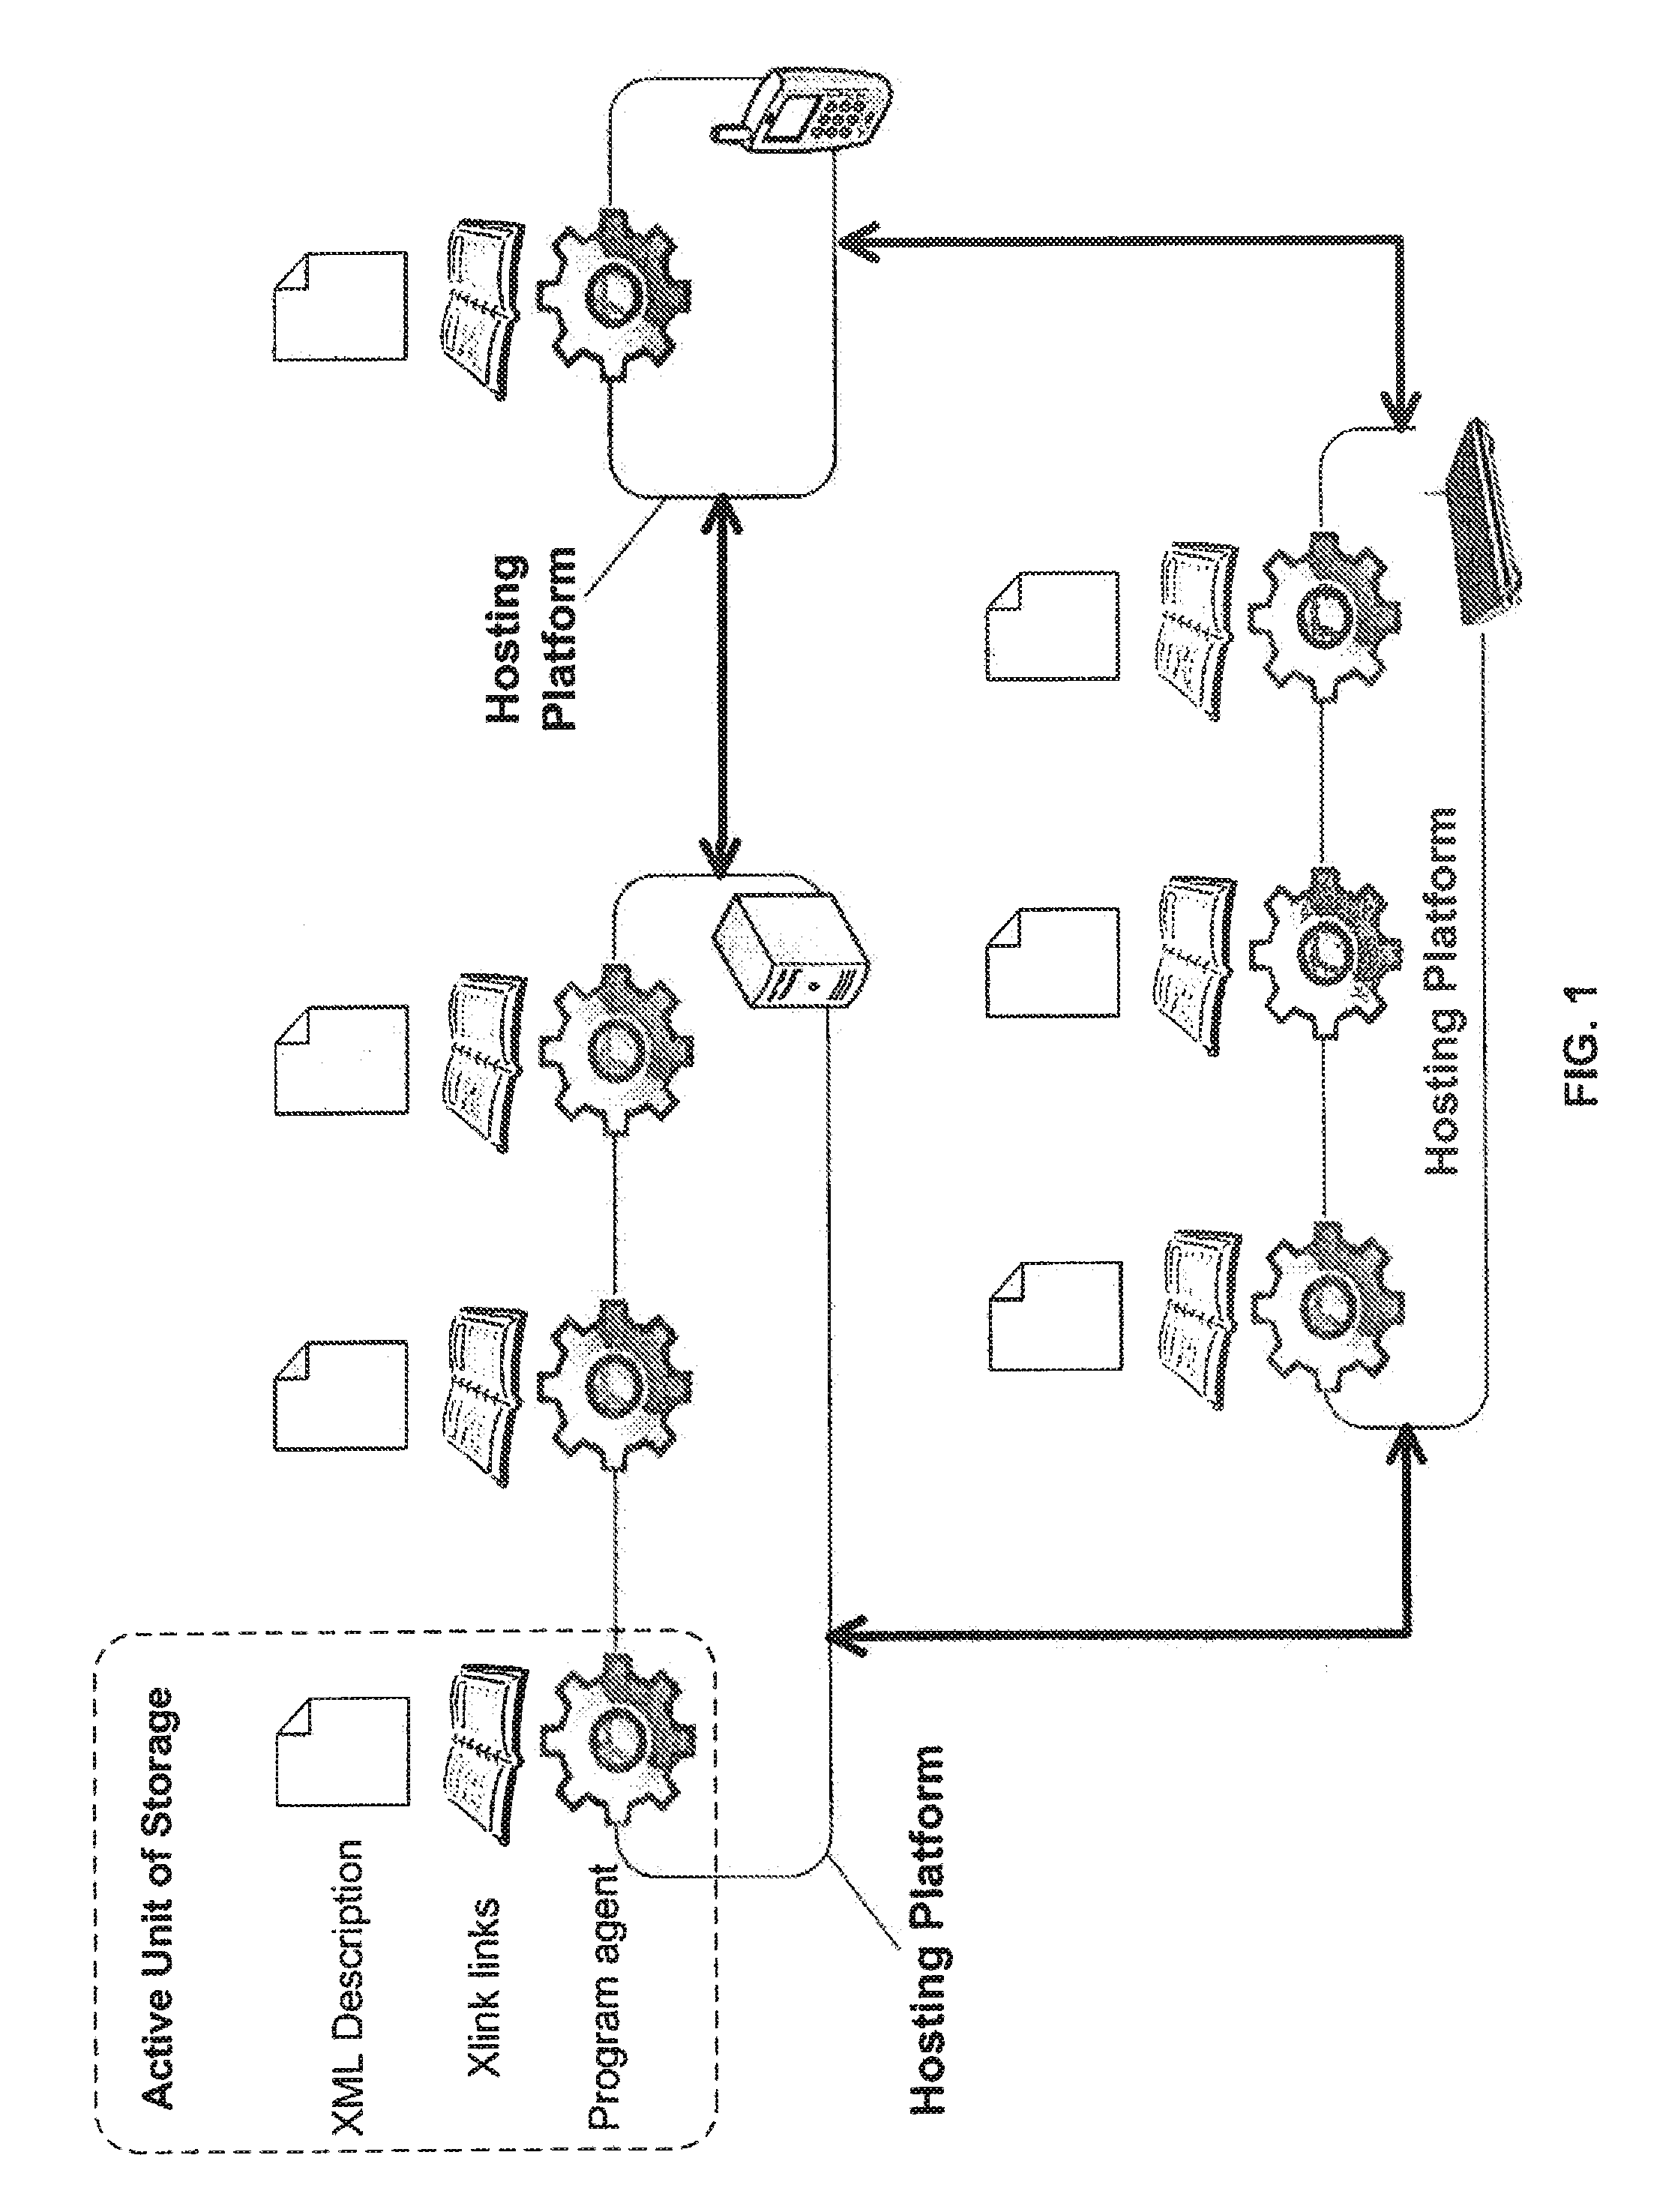 Method and system for storing, searching and retrieving information based on semistructured and de-centralized data sets